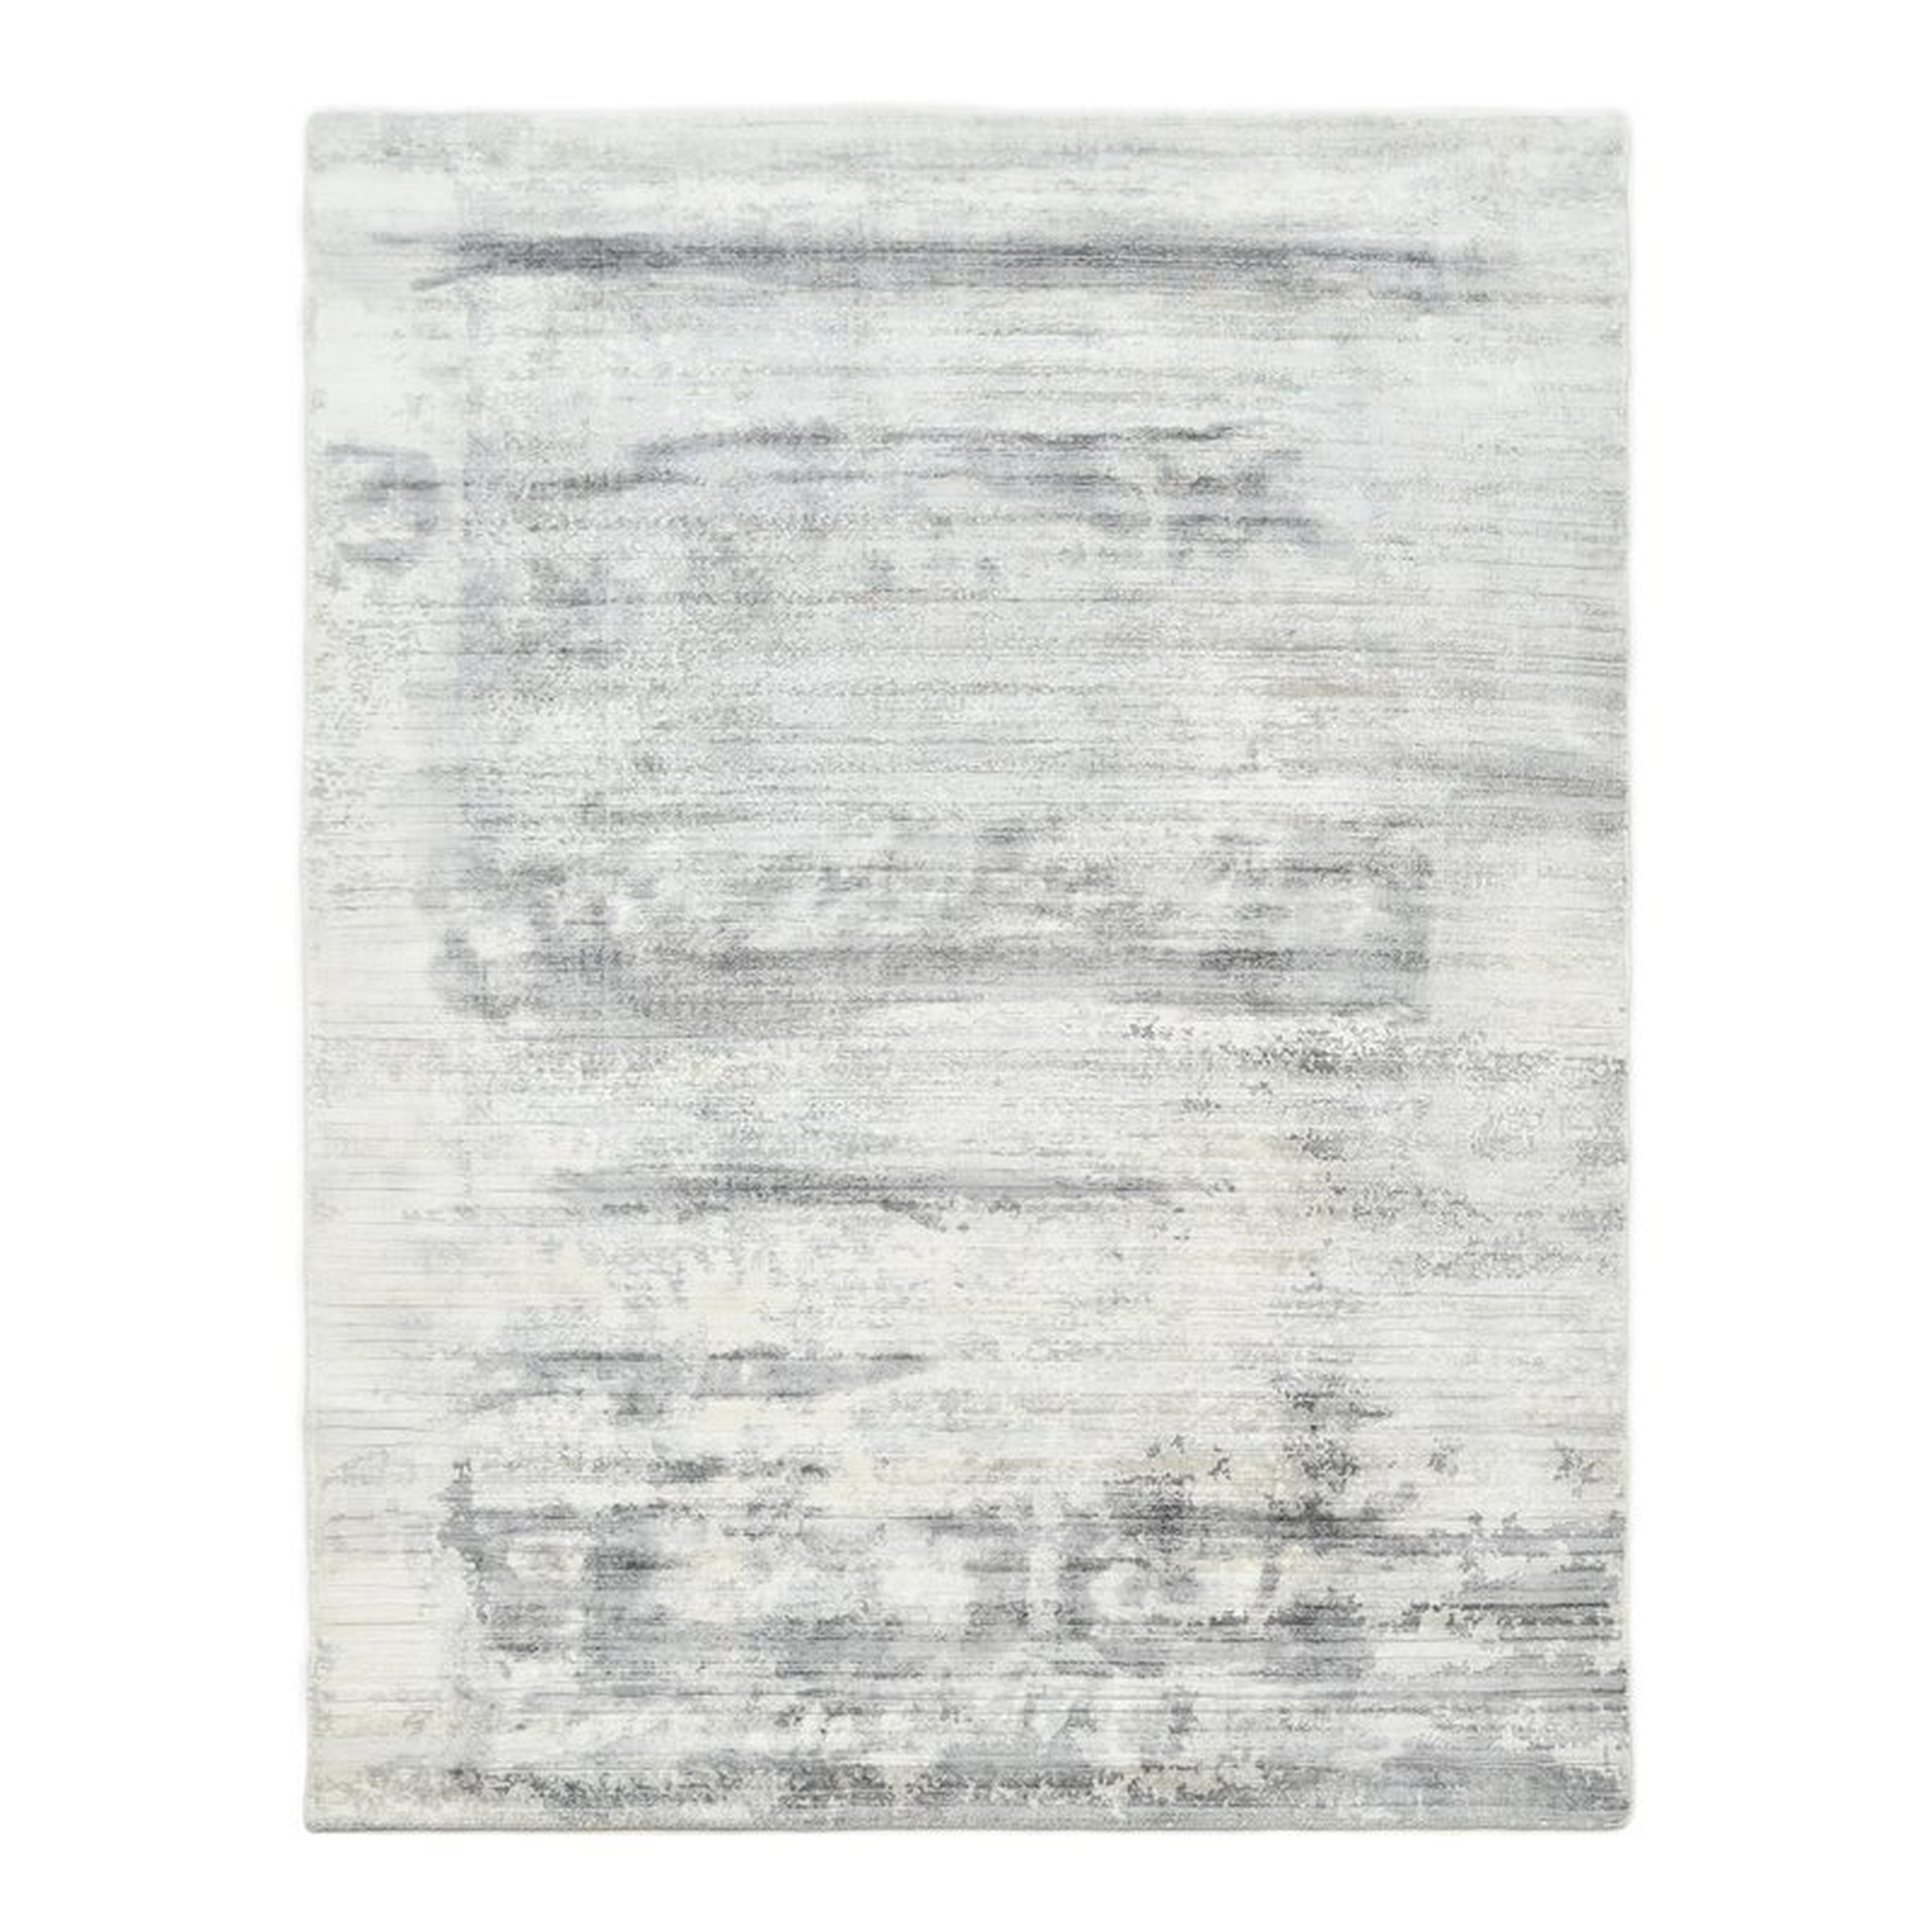 Solo Rugs Solo Rugs Sharilyn Handmade Viscose Area Rug, Silver, 8 x 10 Rug Size: Rectangle 8' x 10' - Perigold